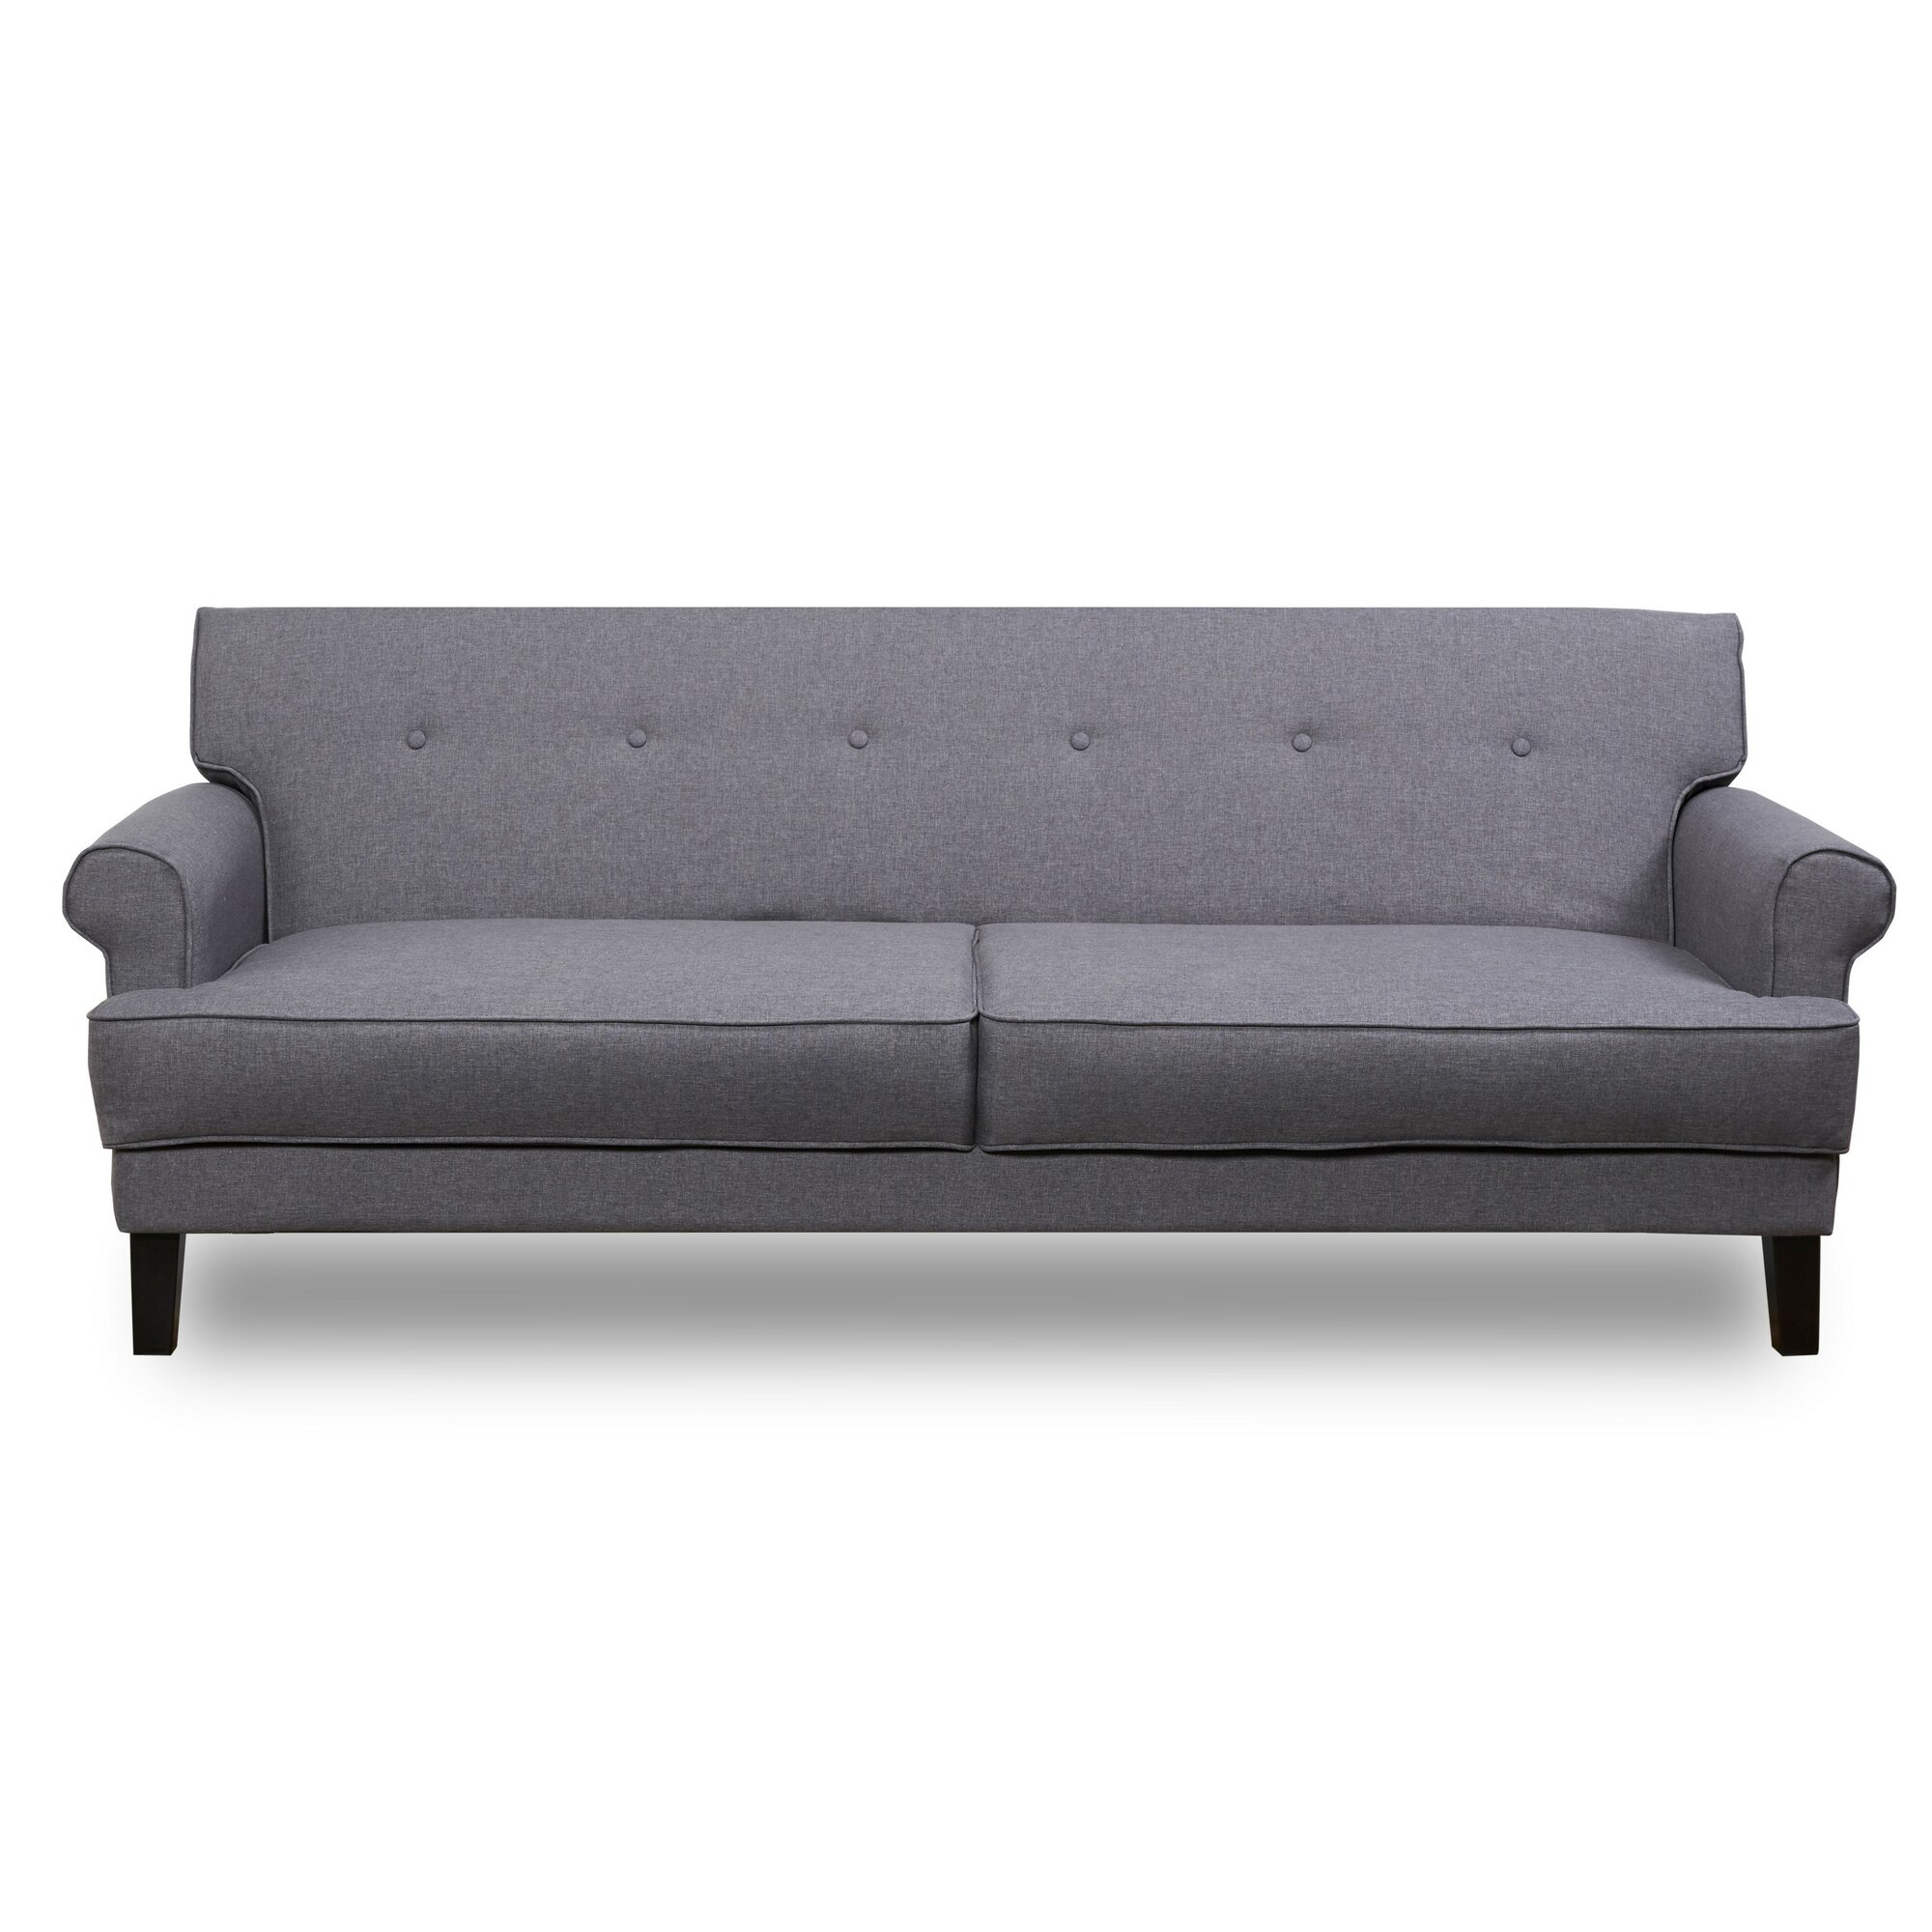 Leader Lifestyle Winsor 4 Seater Clic Clac Sofa Bed & Reviews | Wayfair ...